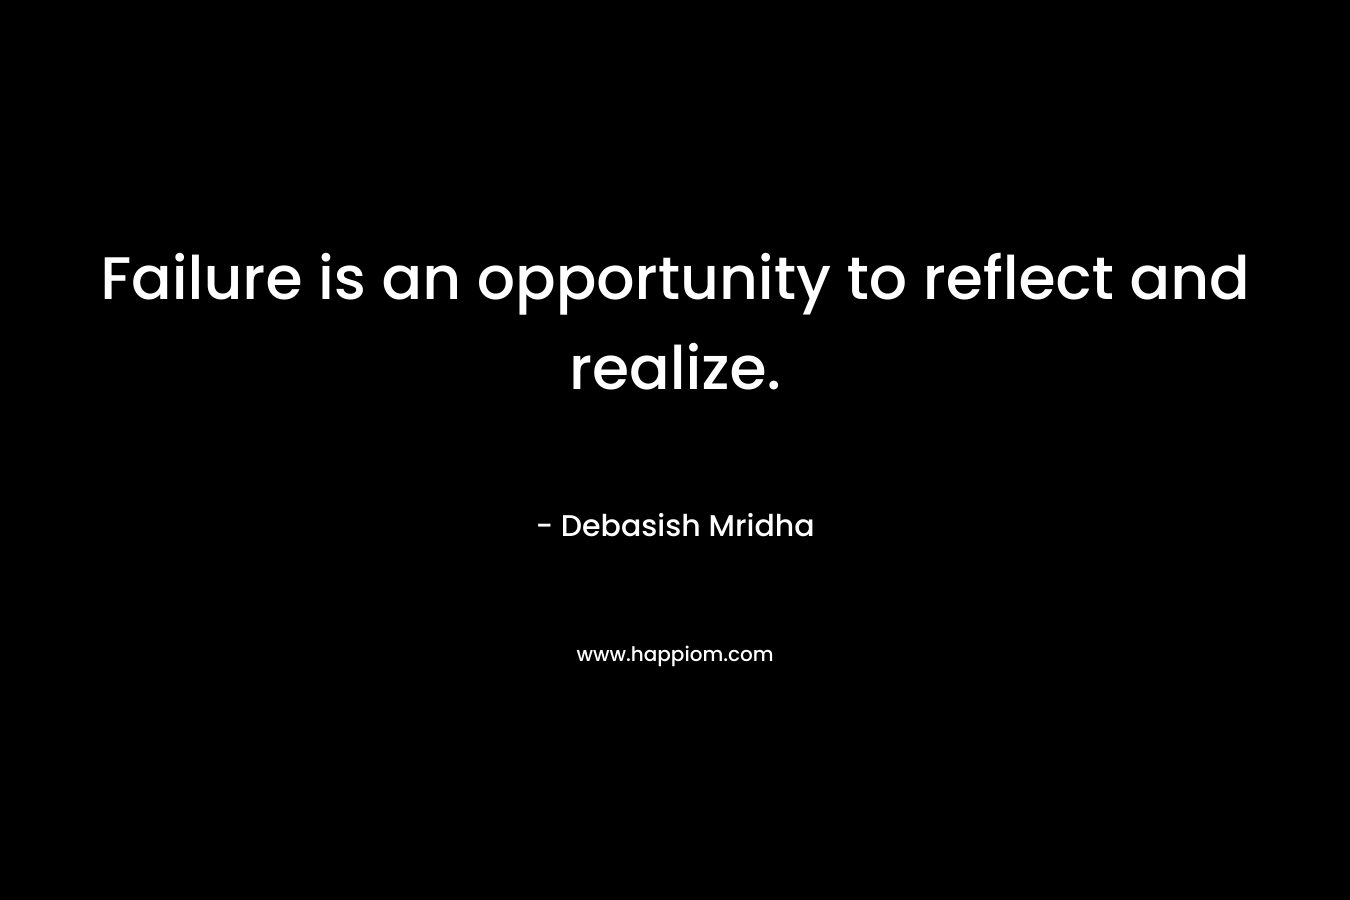 Failure is an opportunity to reflect and realize.